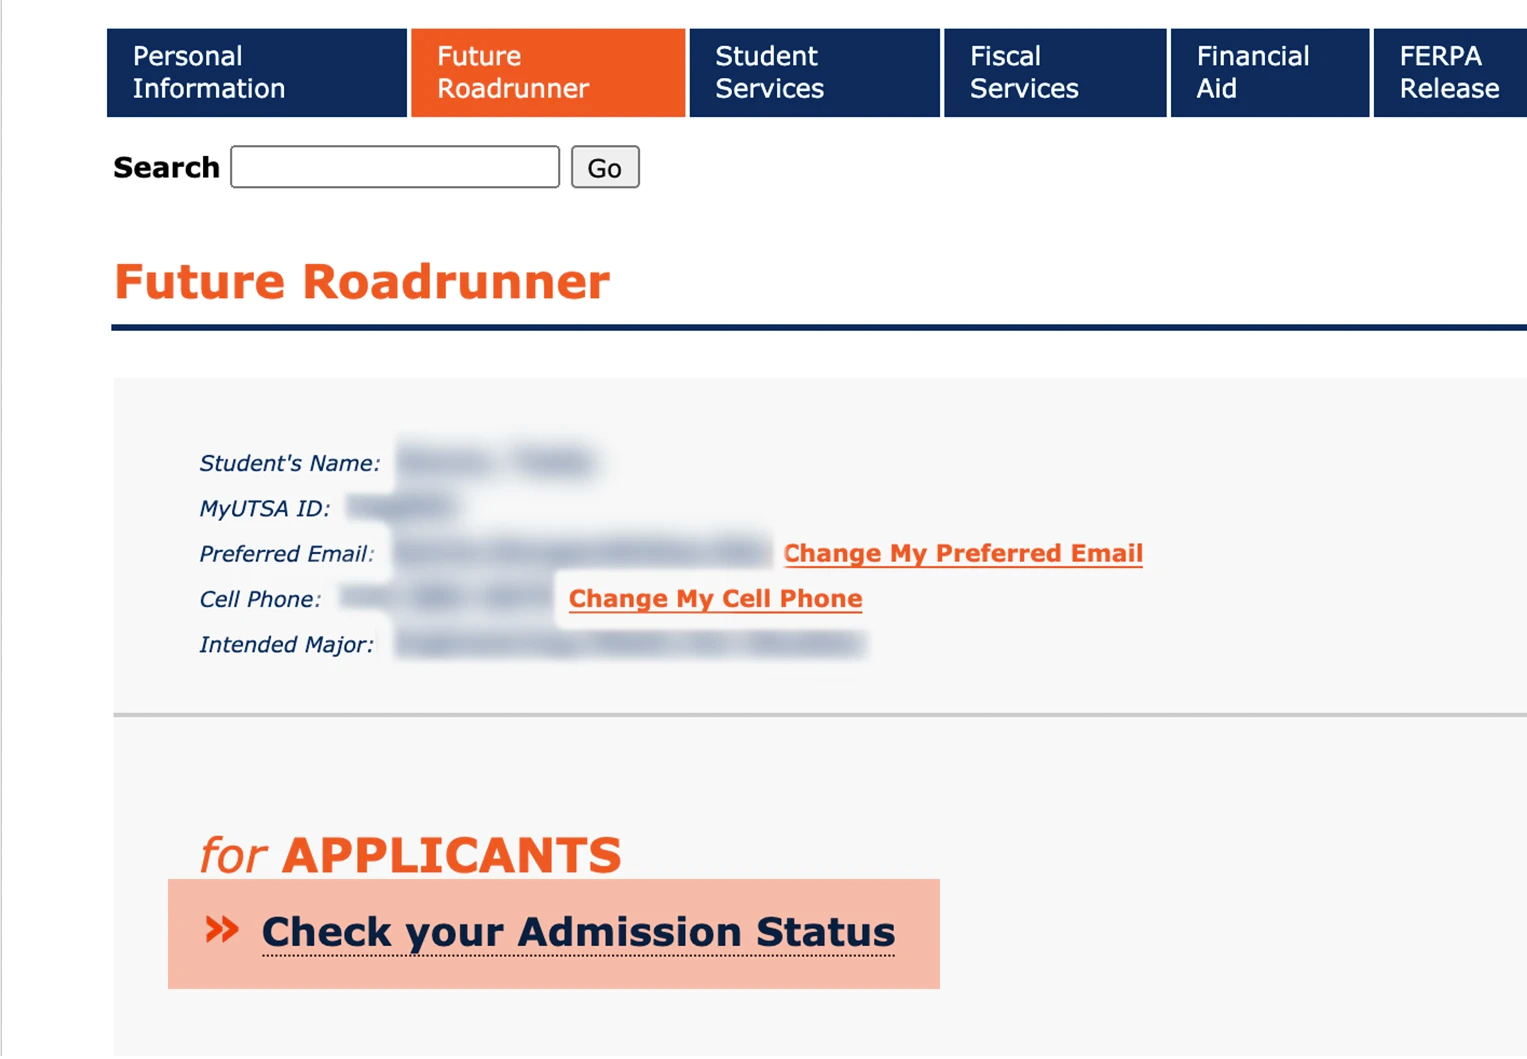 Select Check Your Admission Status